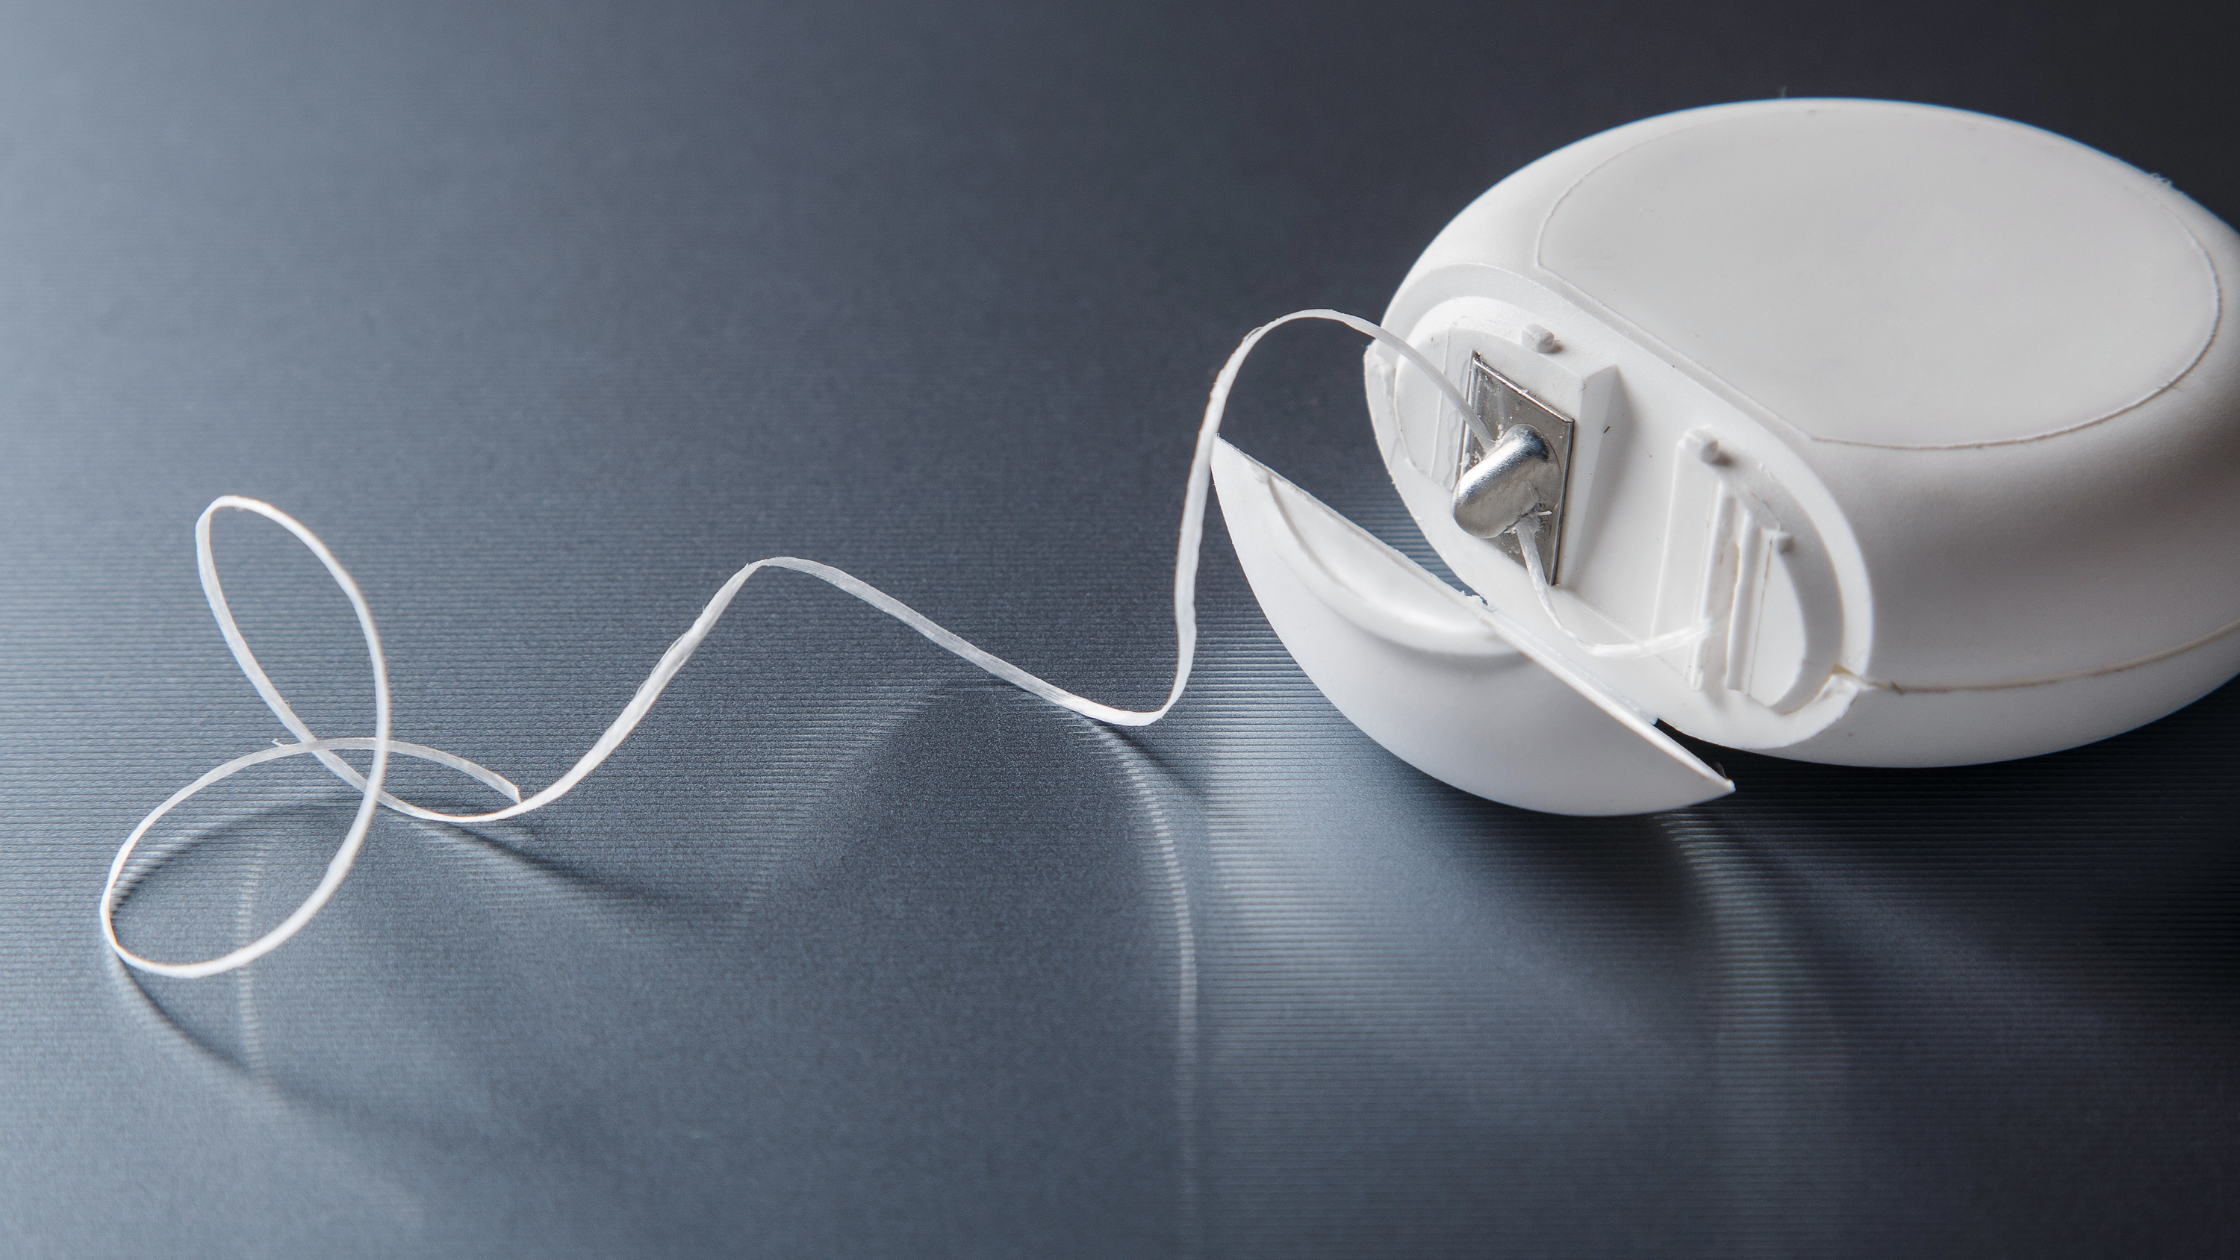 round white container of dental floss open on plain background, floss piling out